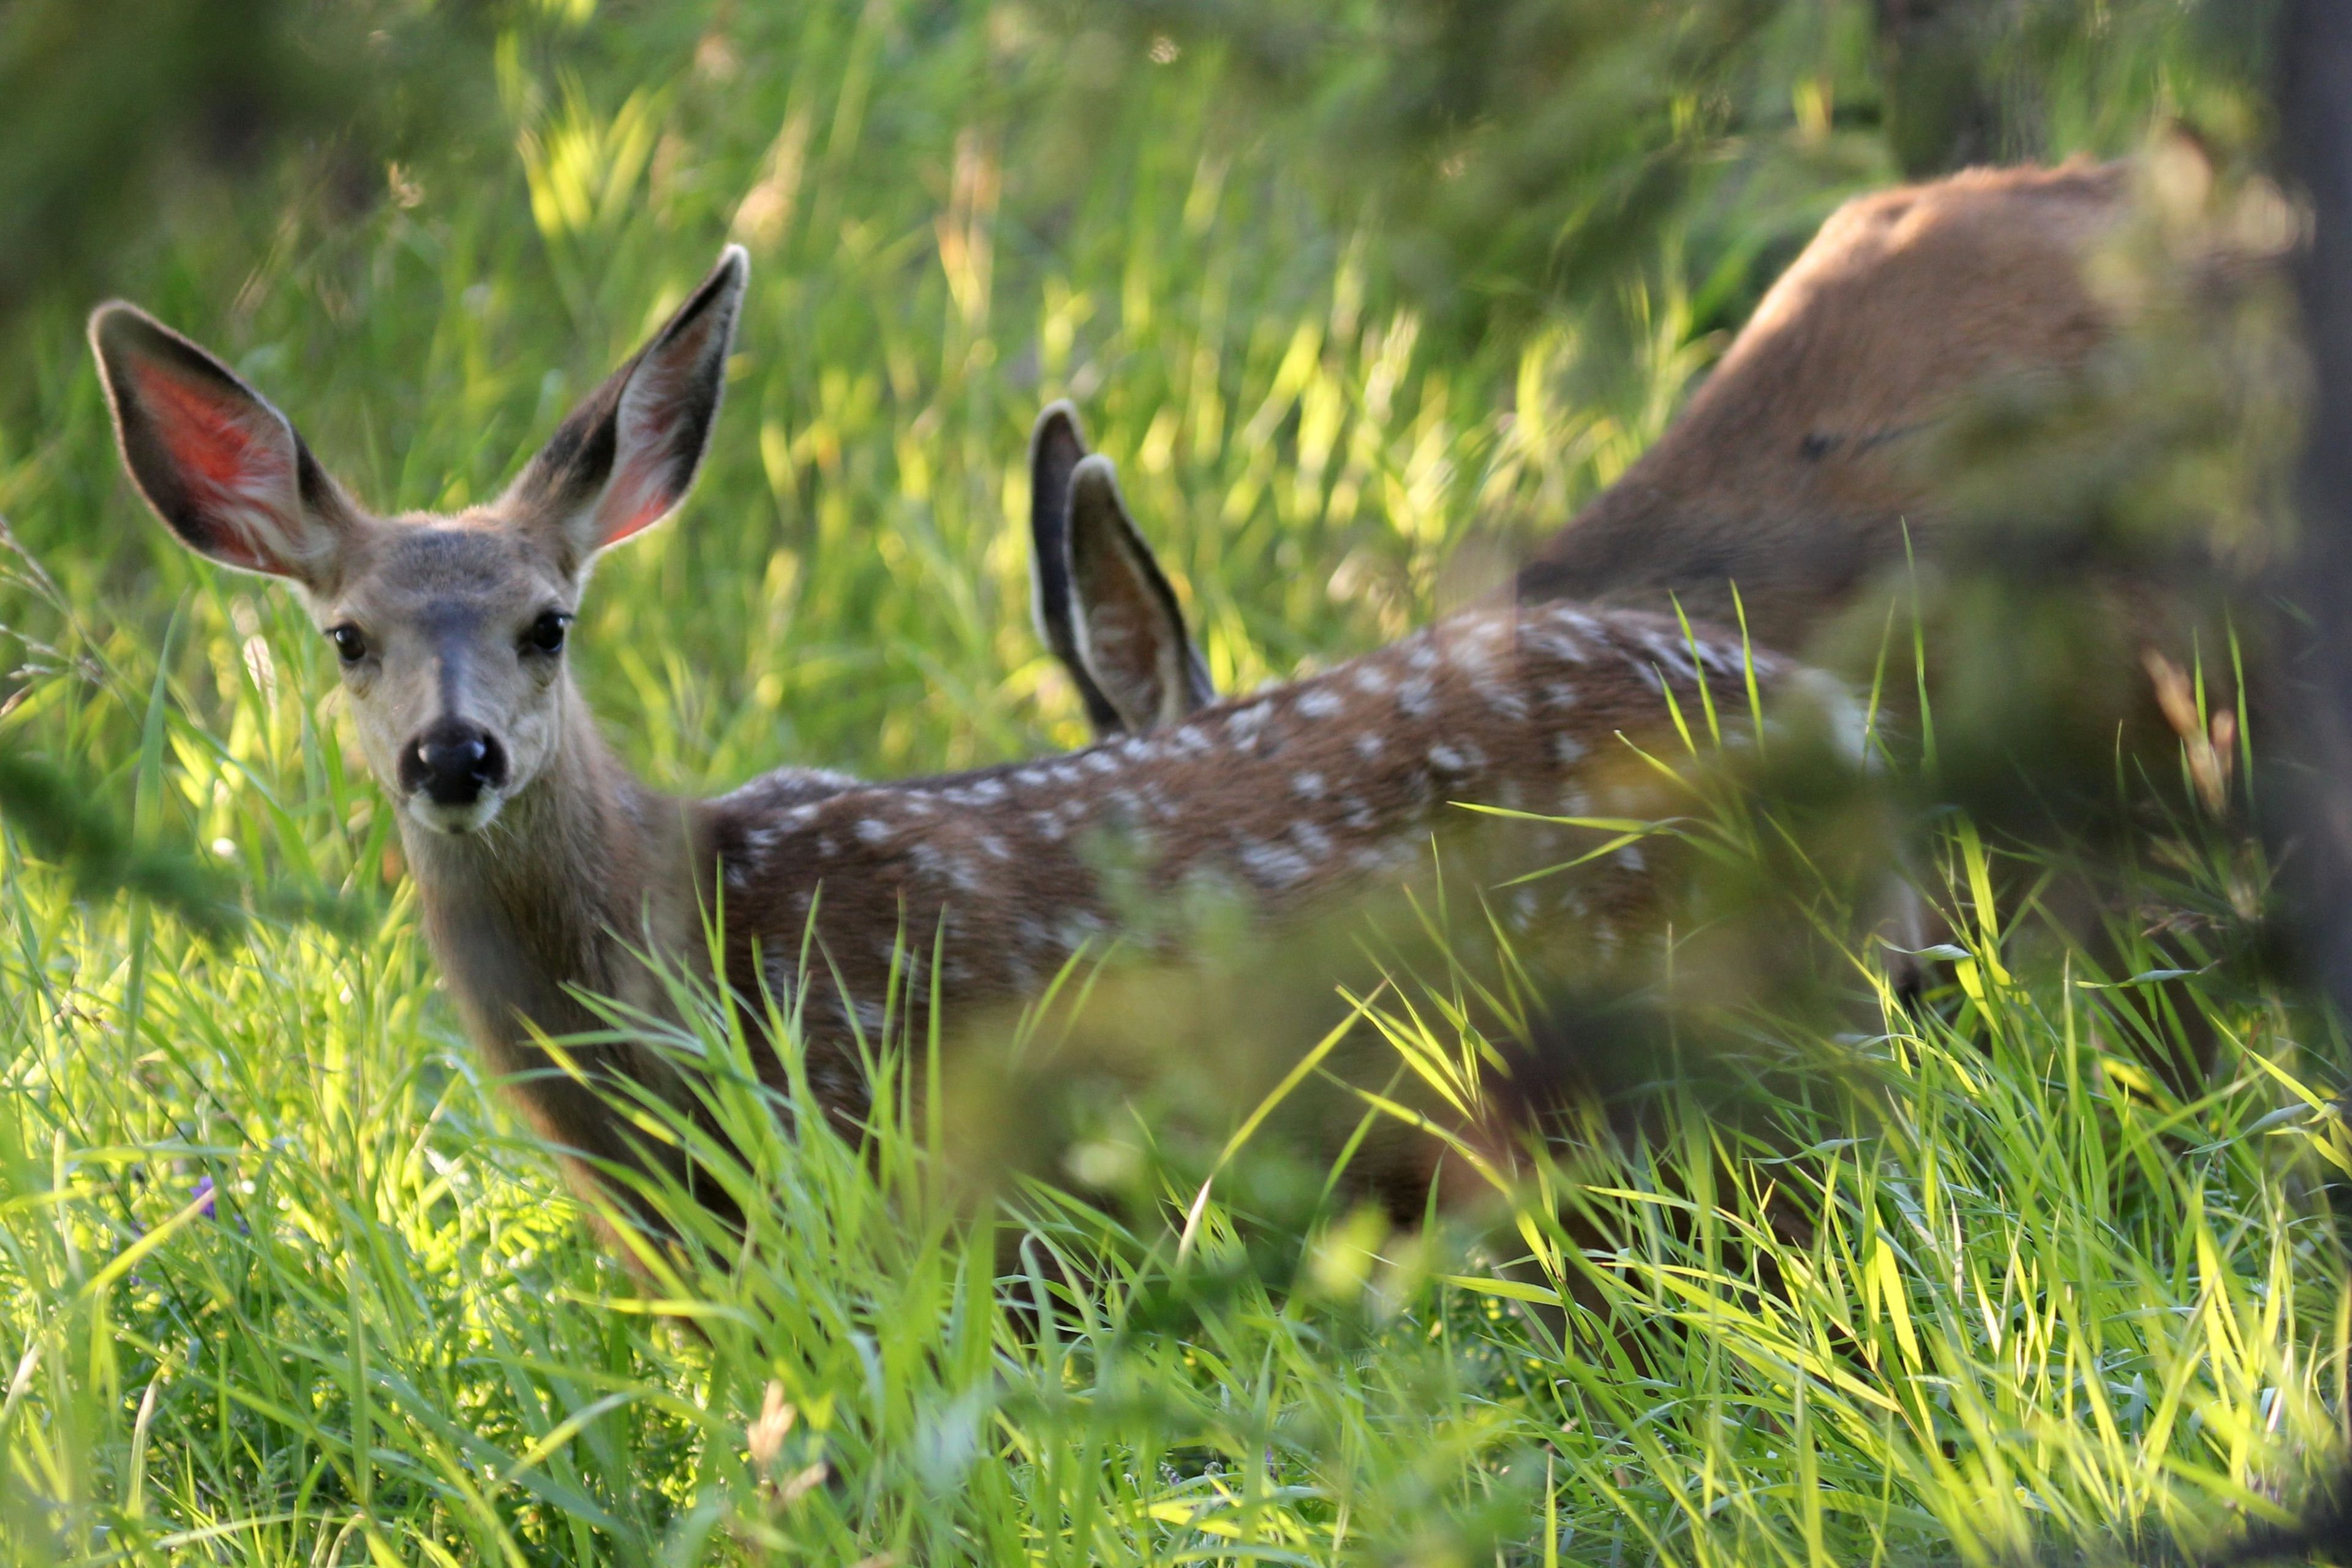 Two deer grazing in a long grassy area.